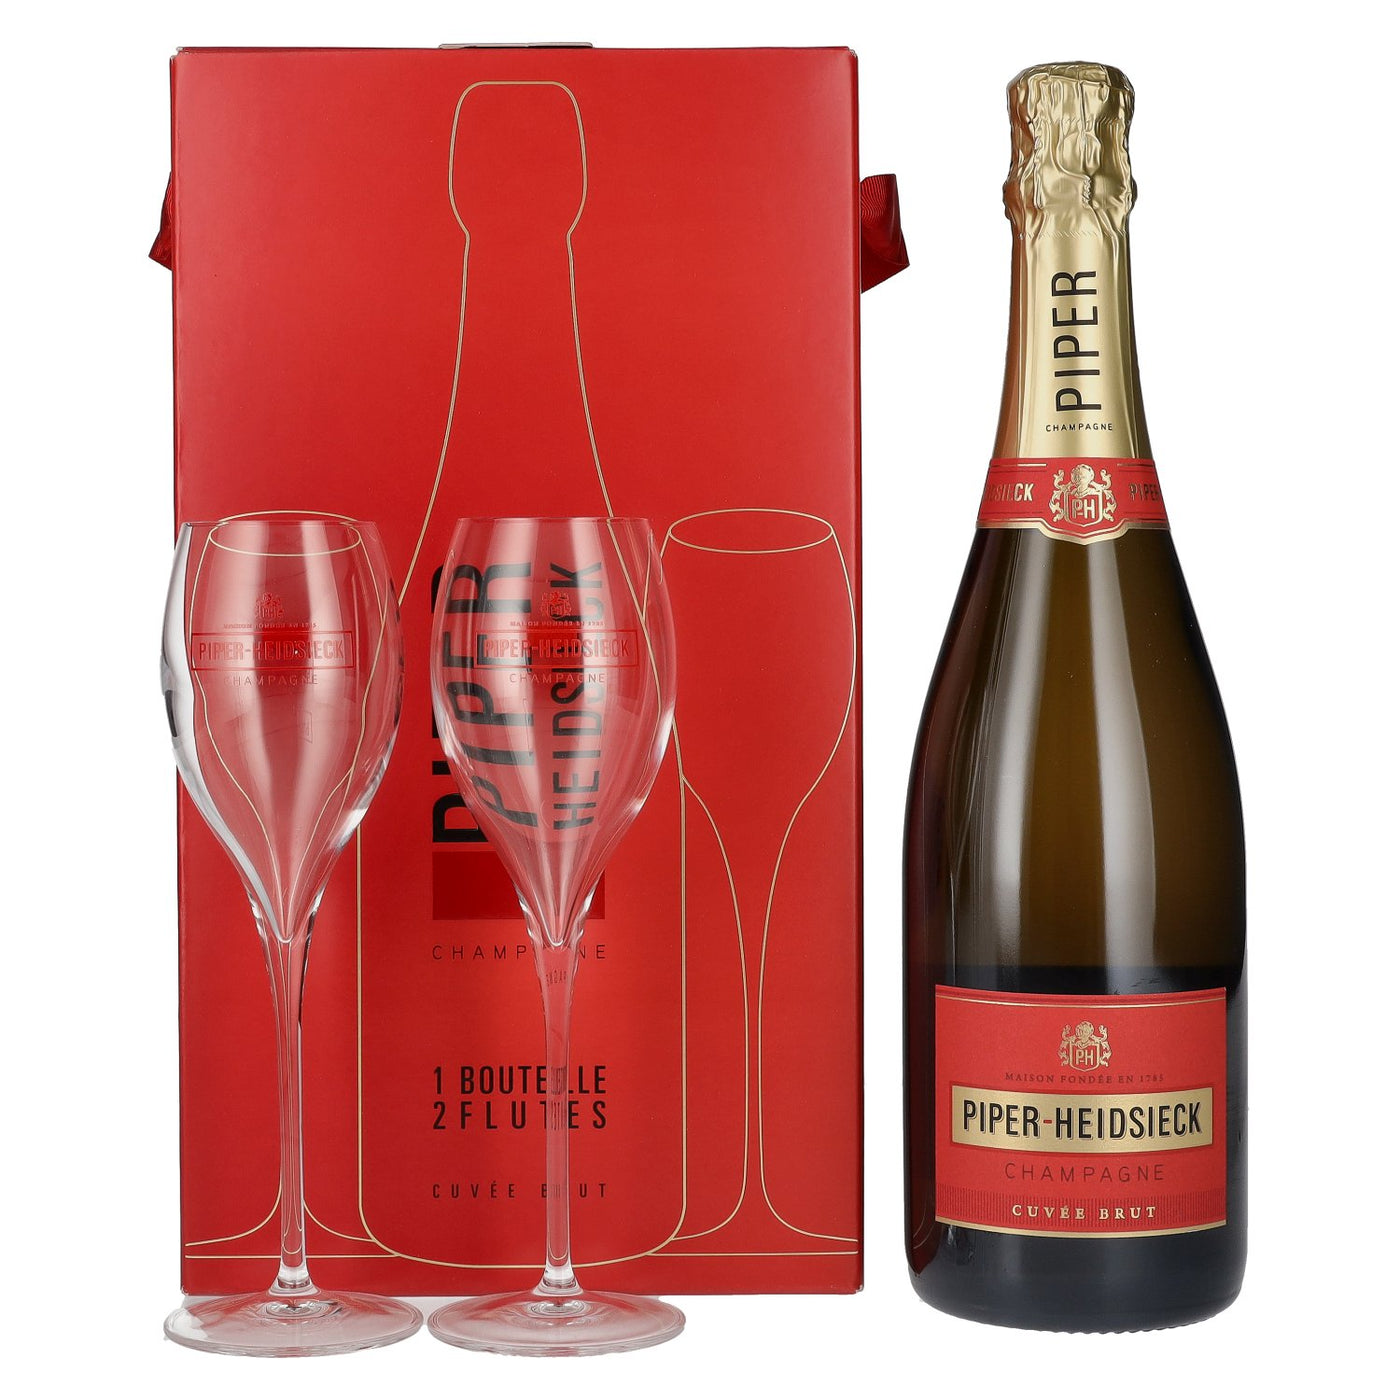 BUY] Piper-Heidsieck | Cuvee Brut NV Glasses with - at